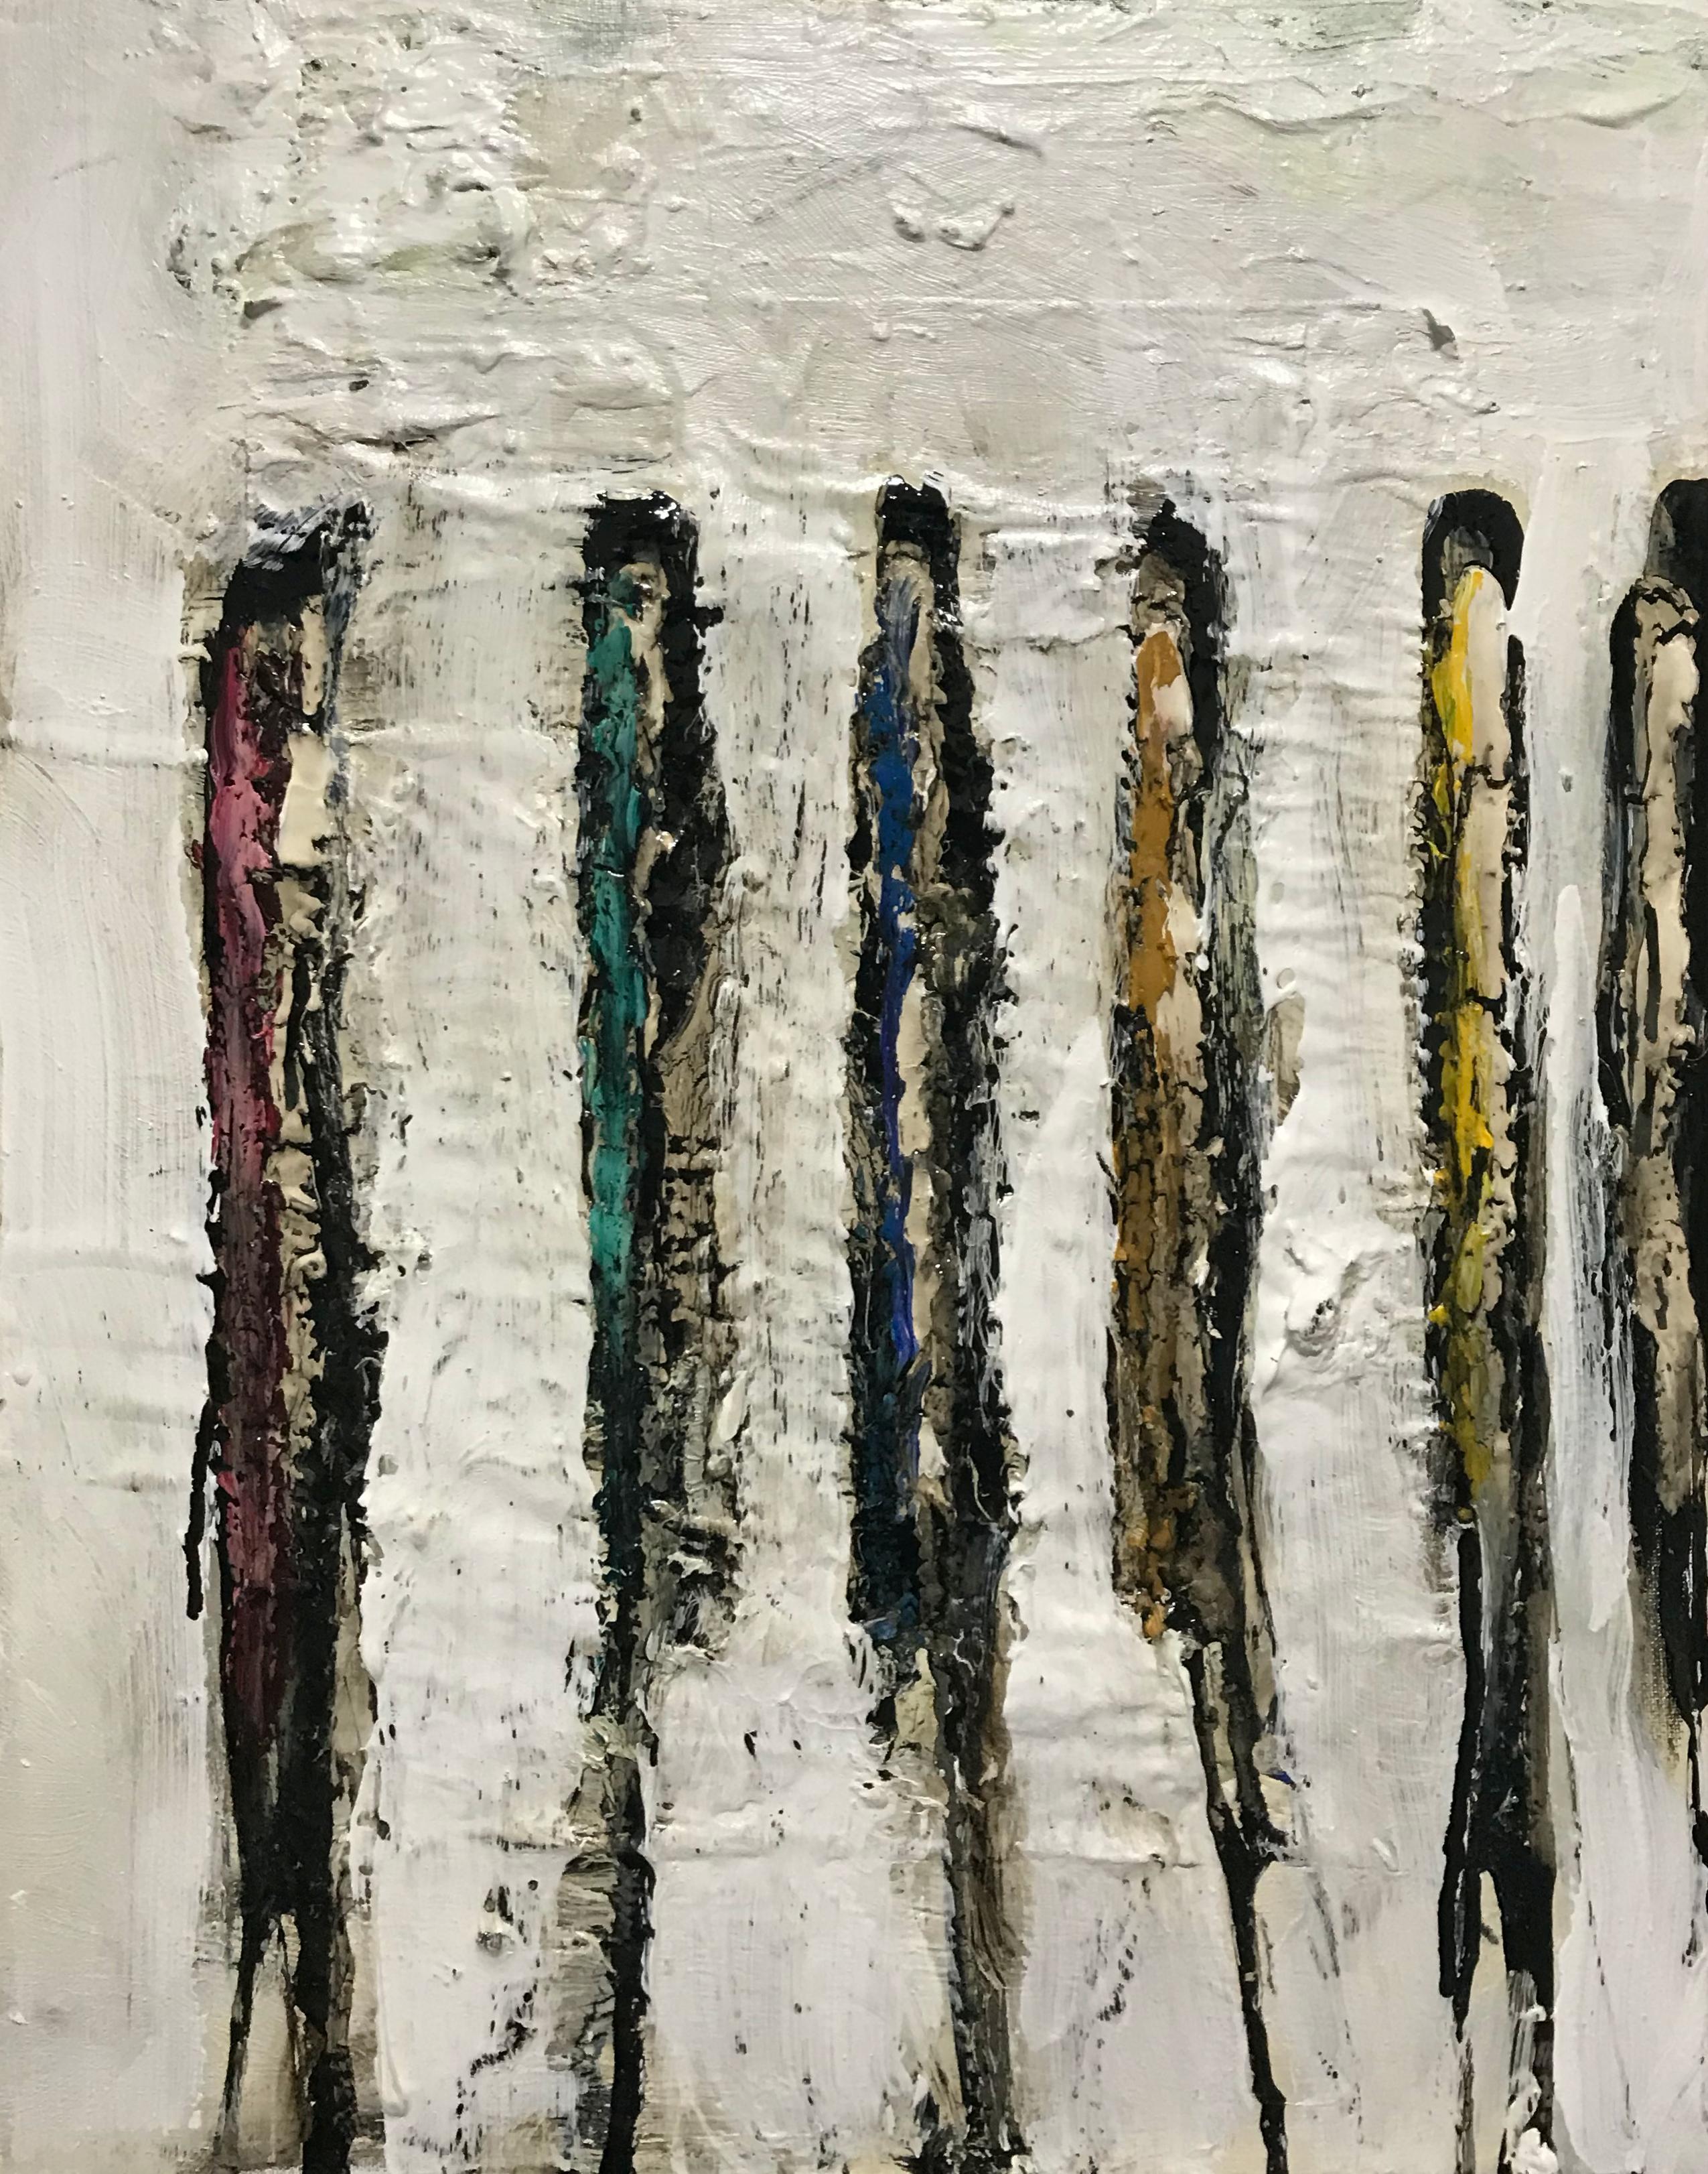 Part of the current series of paintings using tar and house paint in addition to more conventional artists' media such as oil and acrylic. 

Artist's Statement: 